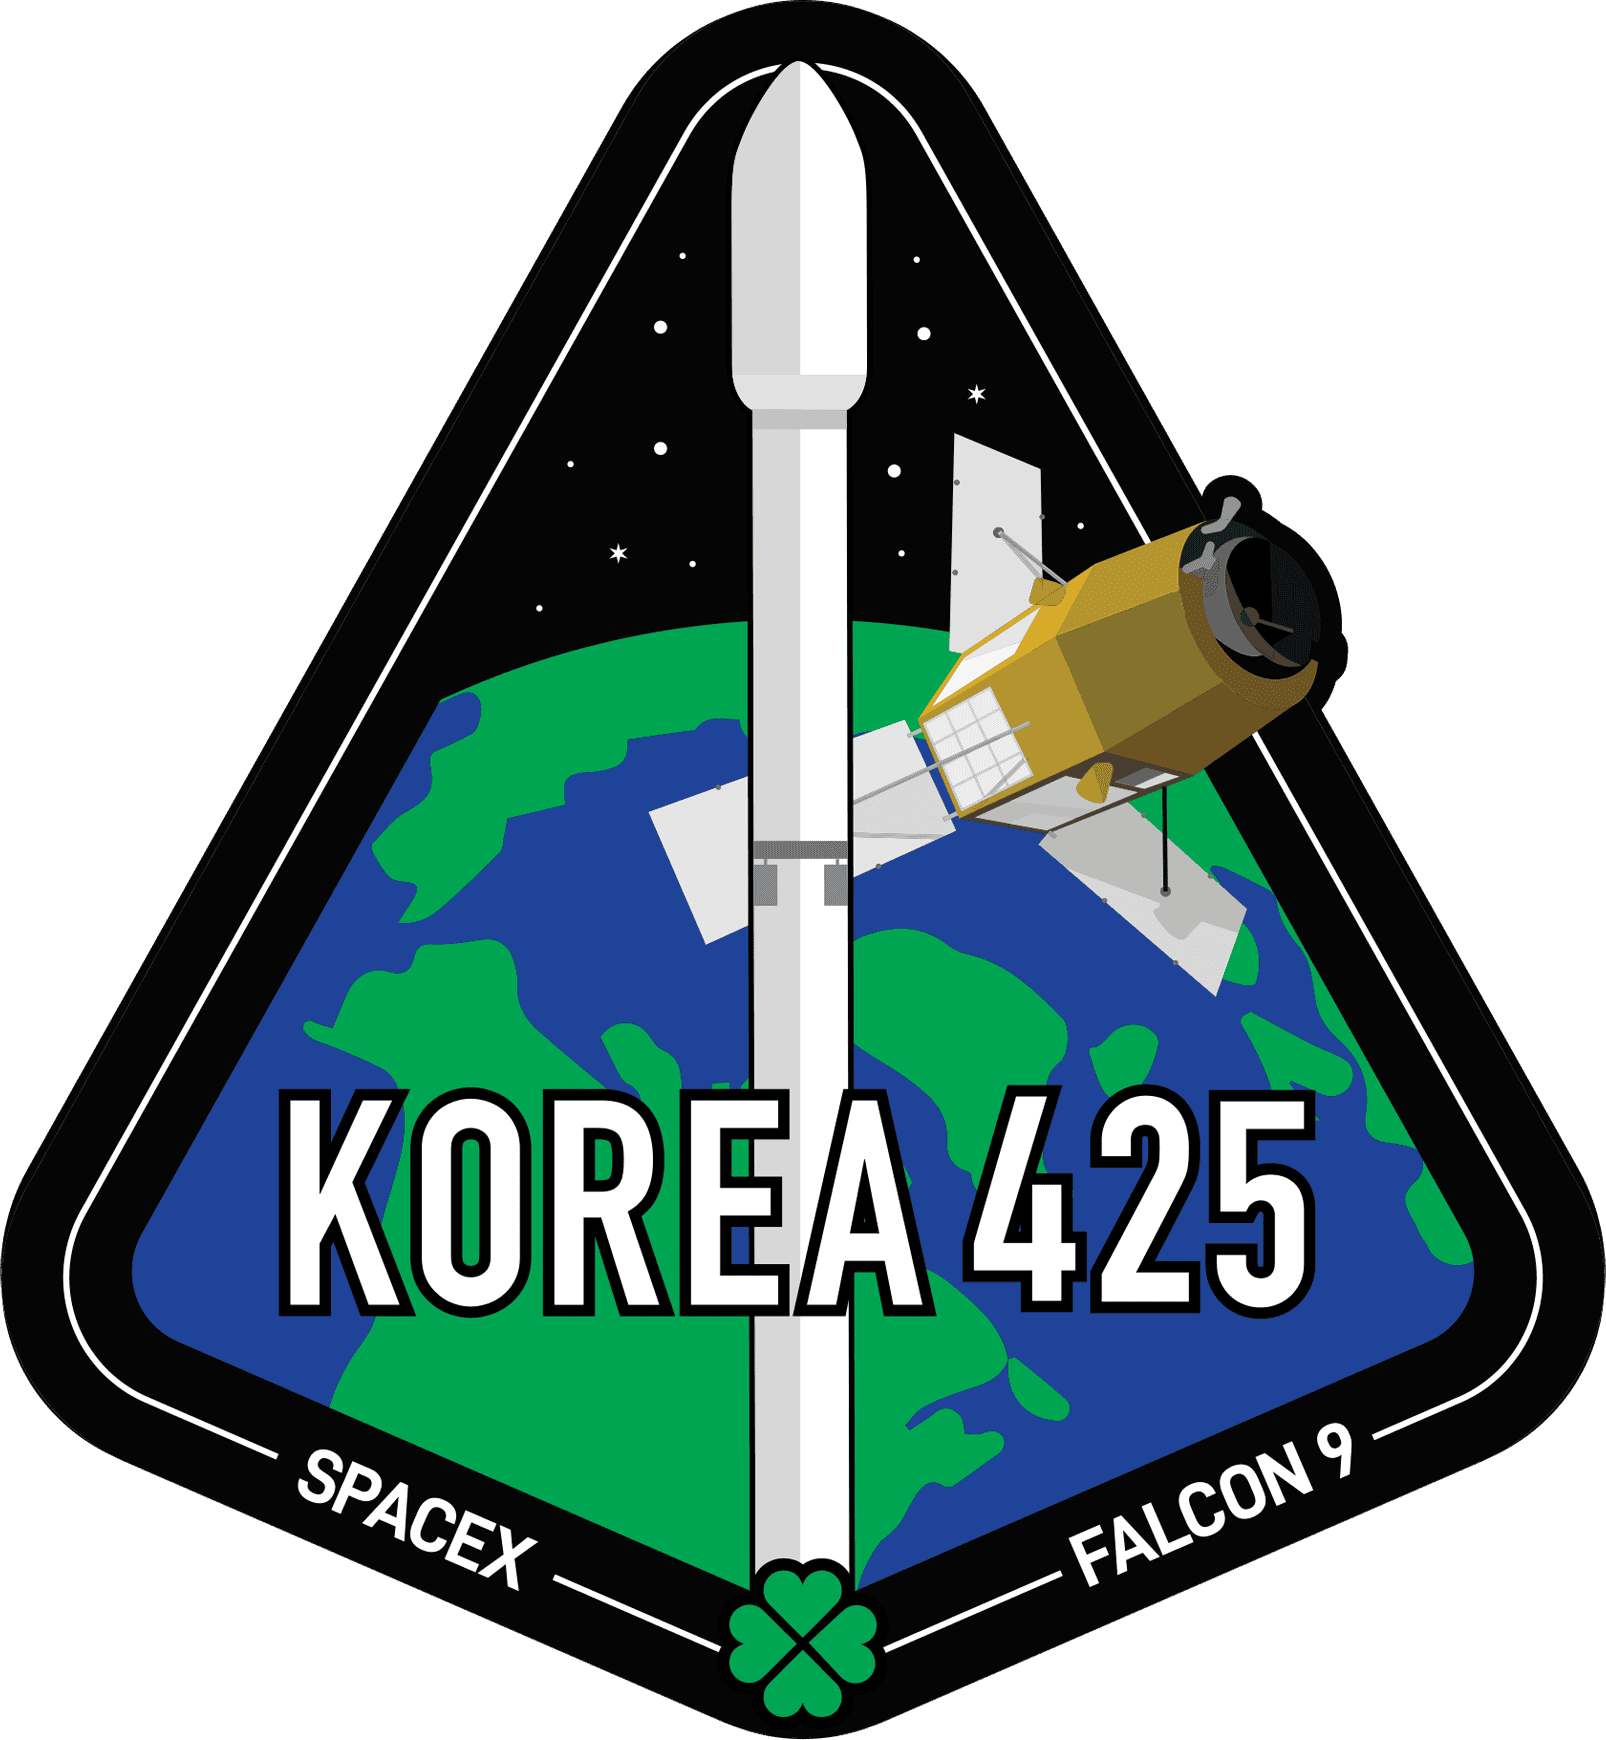 Mission patch for 425 Project Flight 1 & rideshare